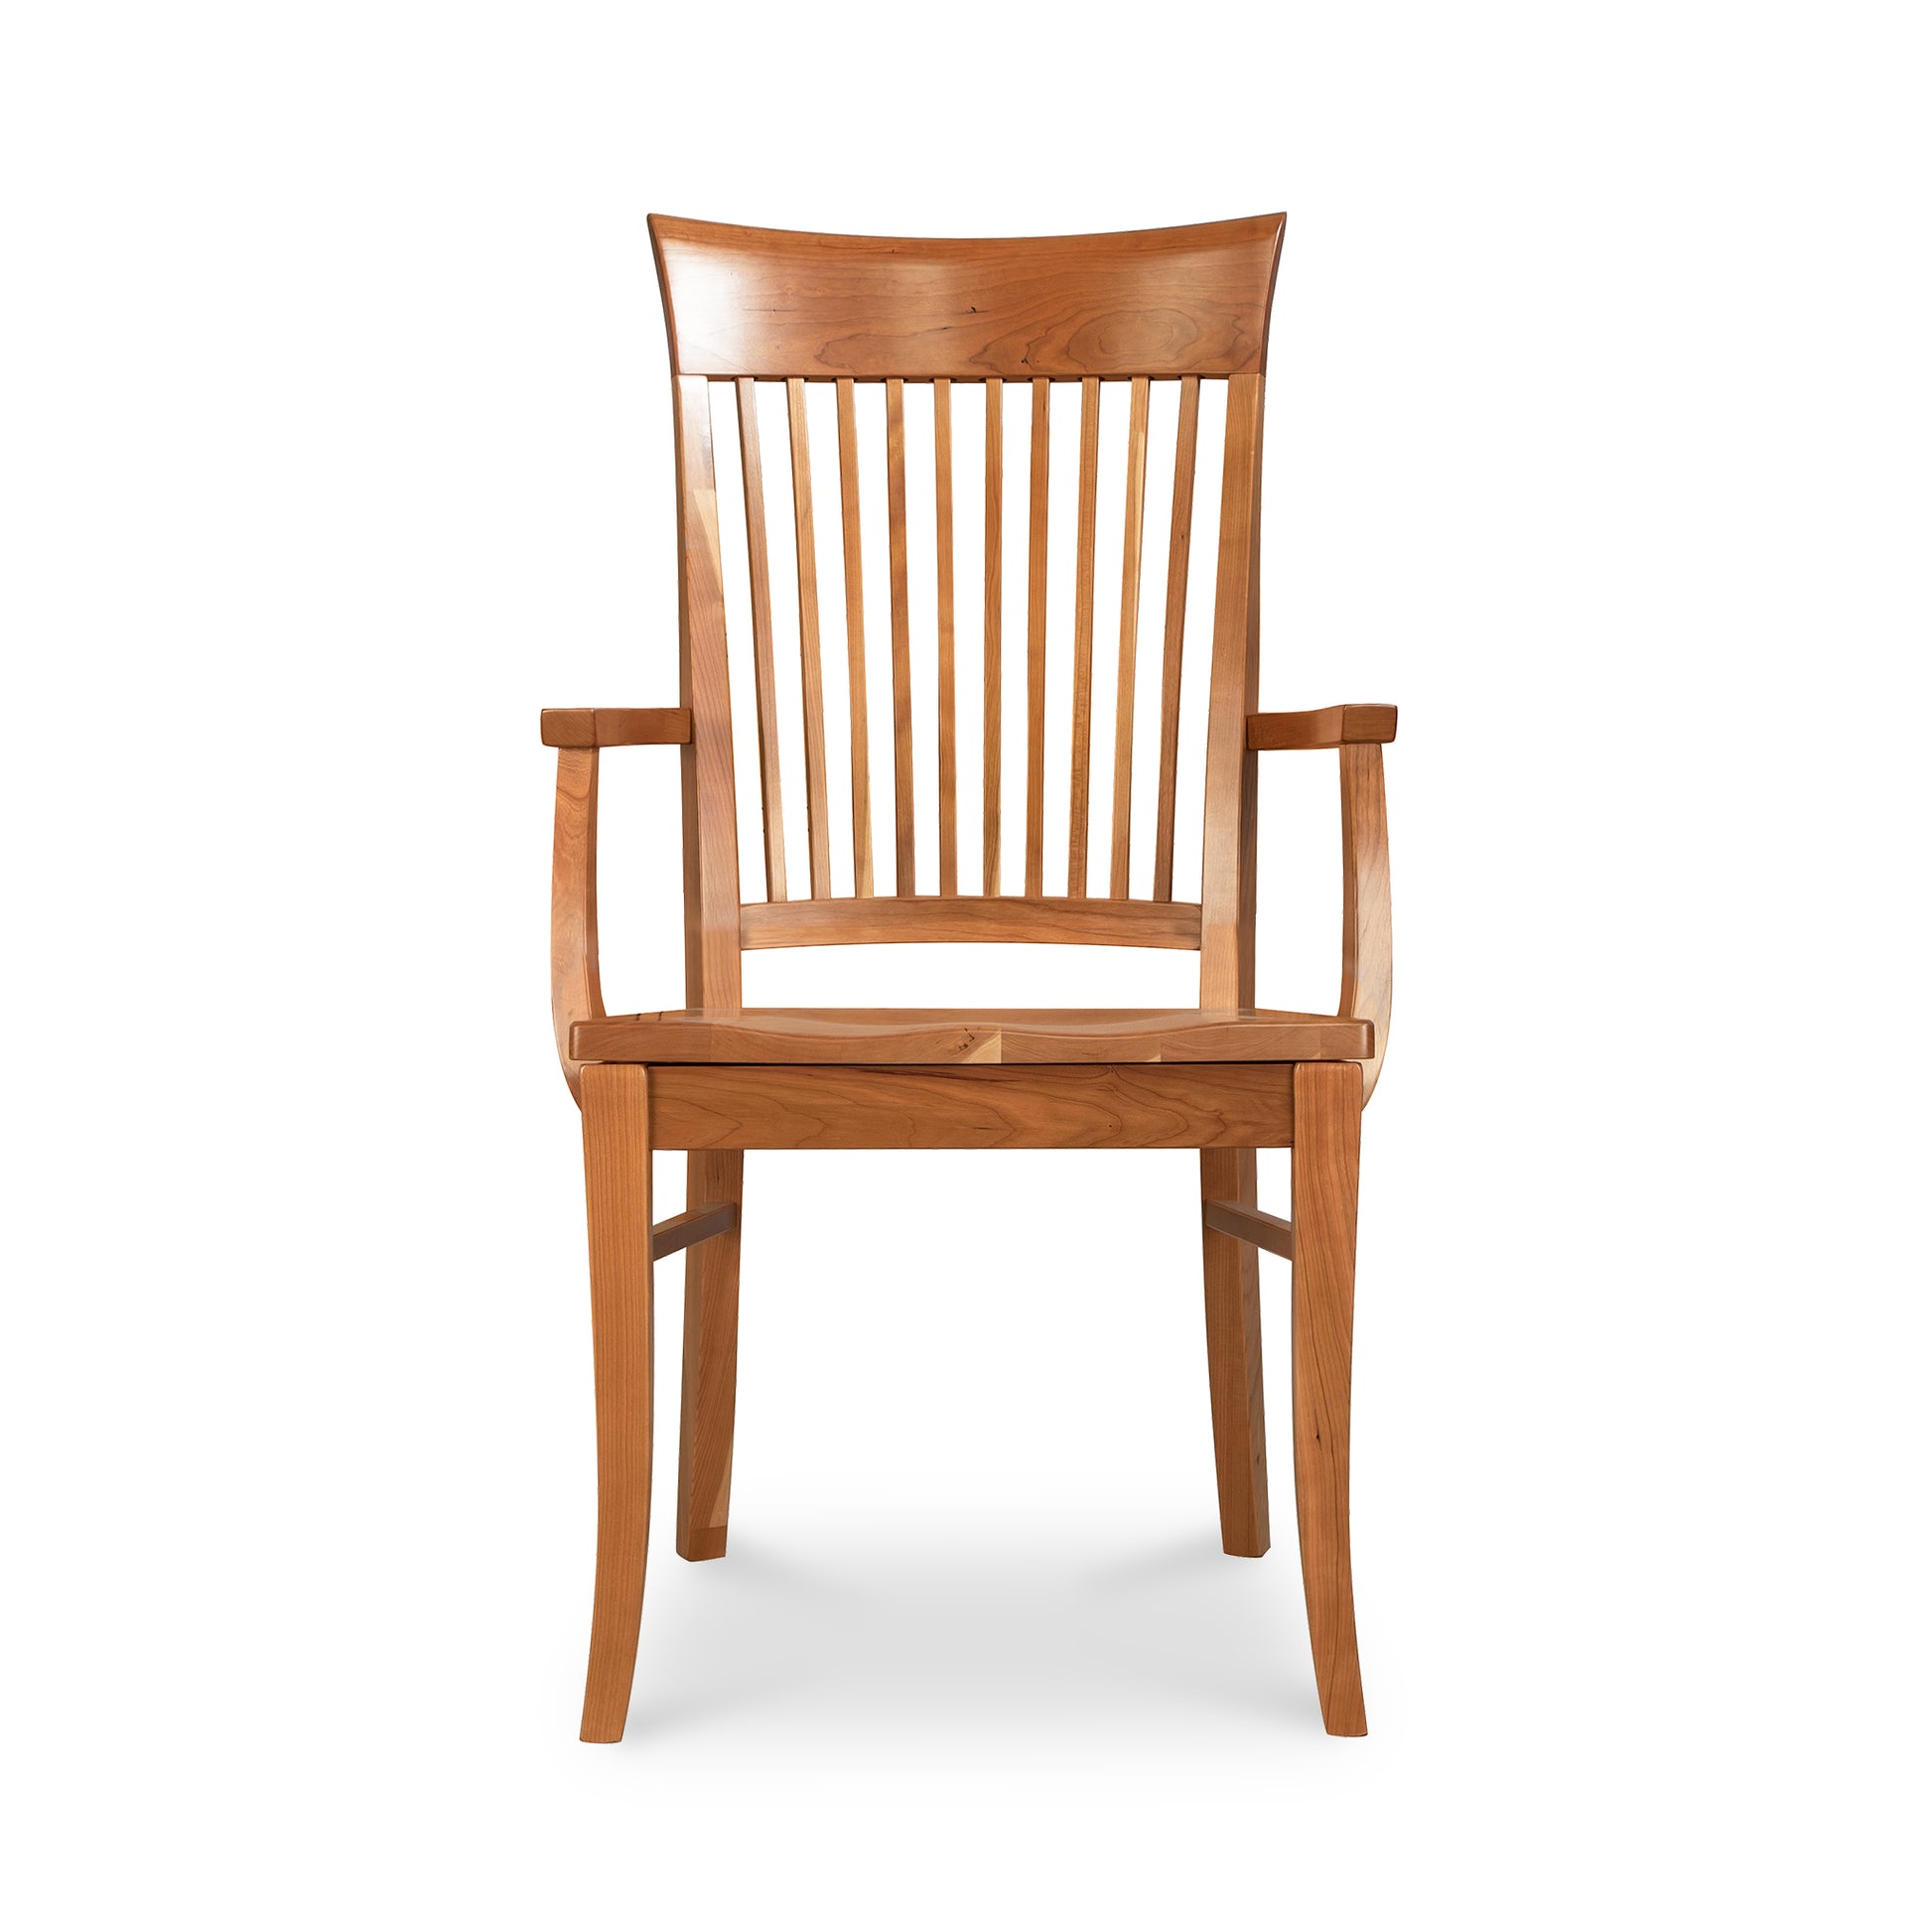 A wooden chair with slats on a white background.